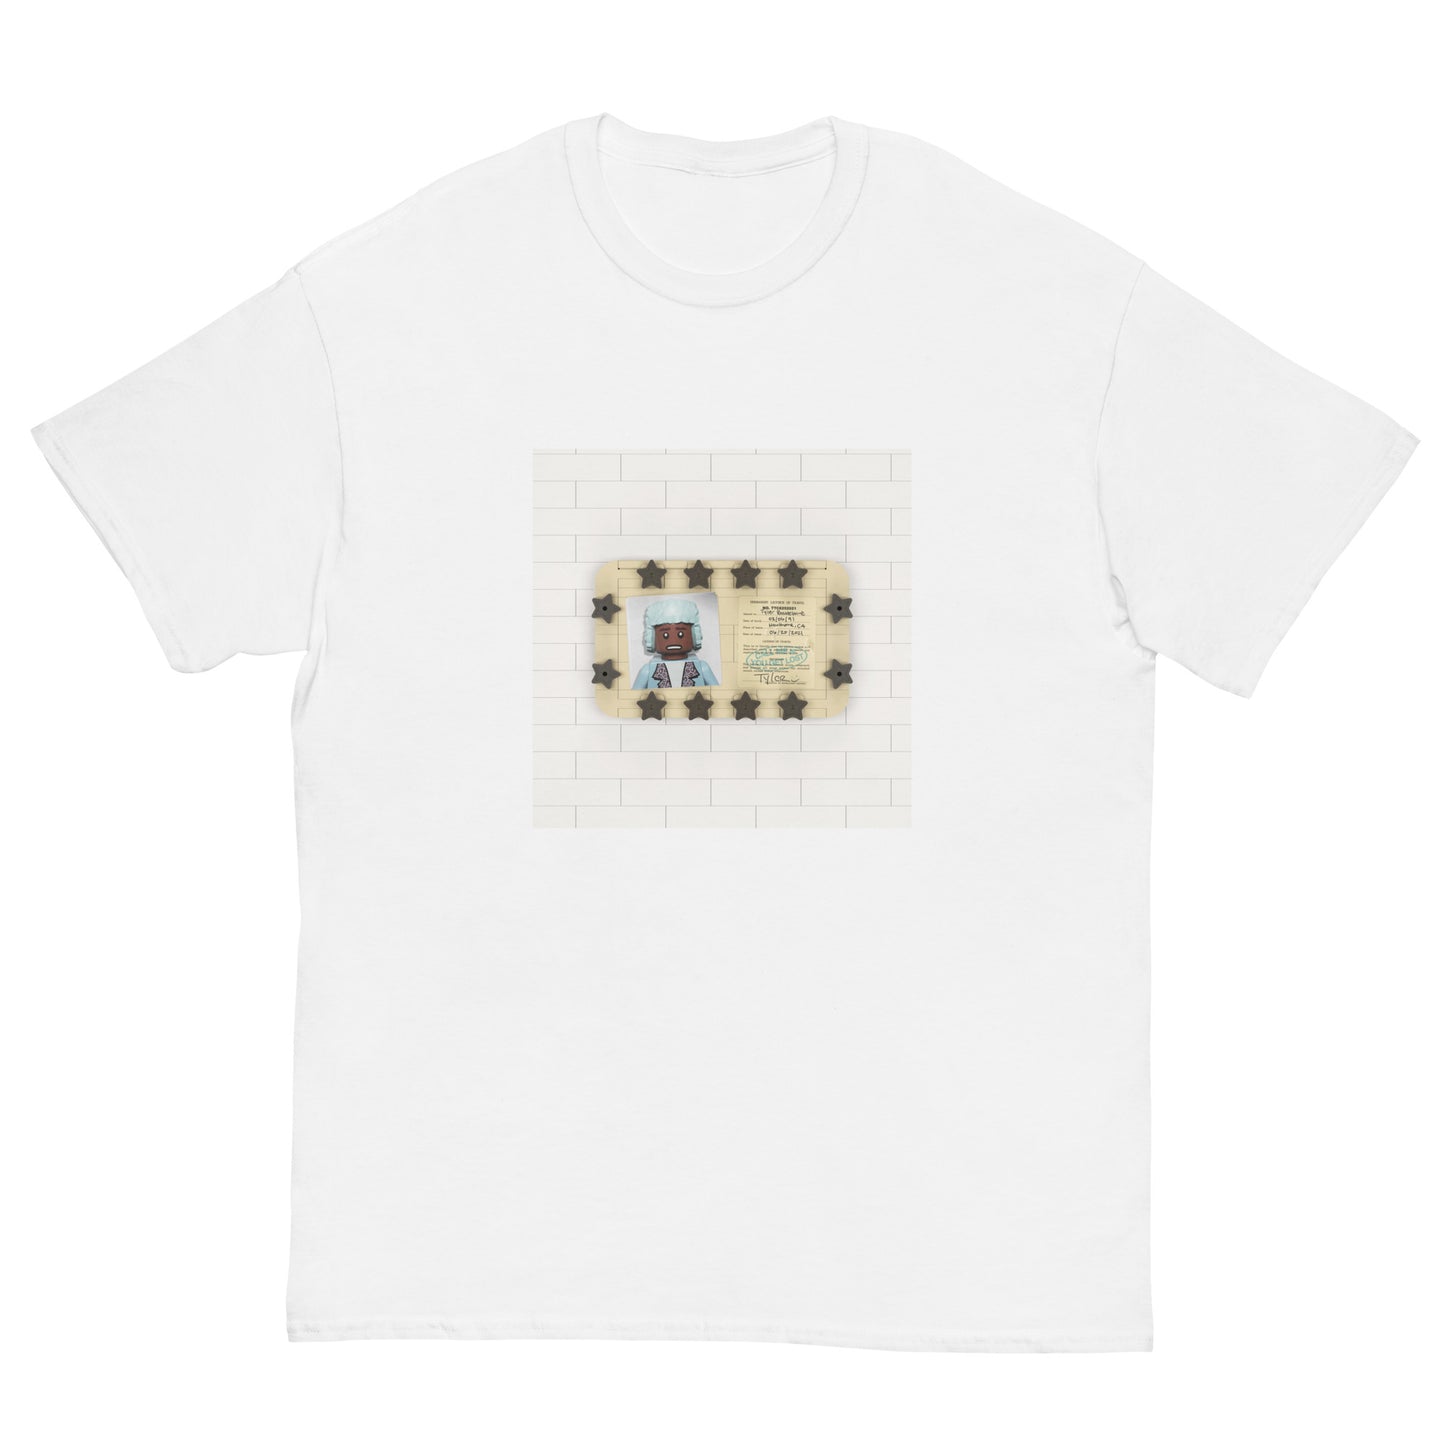 "Tyler, The Creator - Call Me If You Get Lost" Lego Parody Tshirt